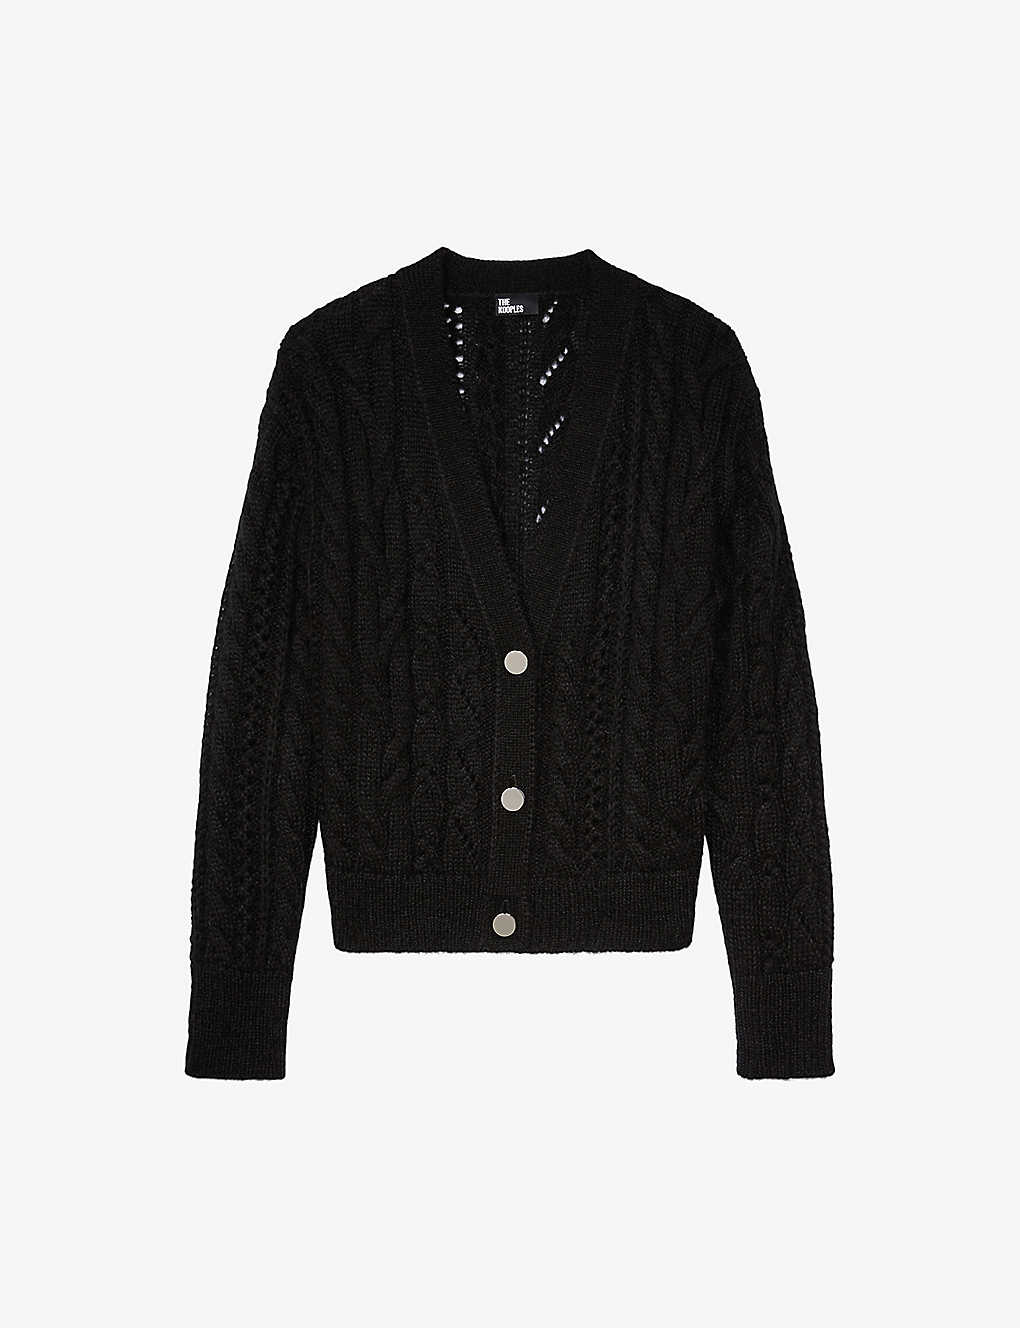 The Kooples Womens Black V-neck Open-weave Knitted Cardigan